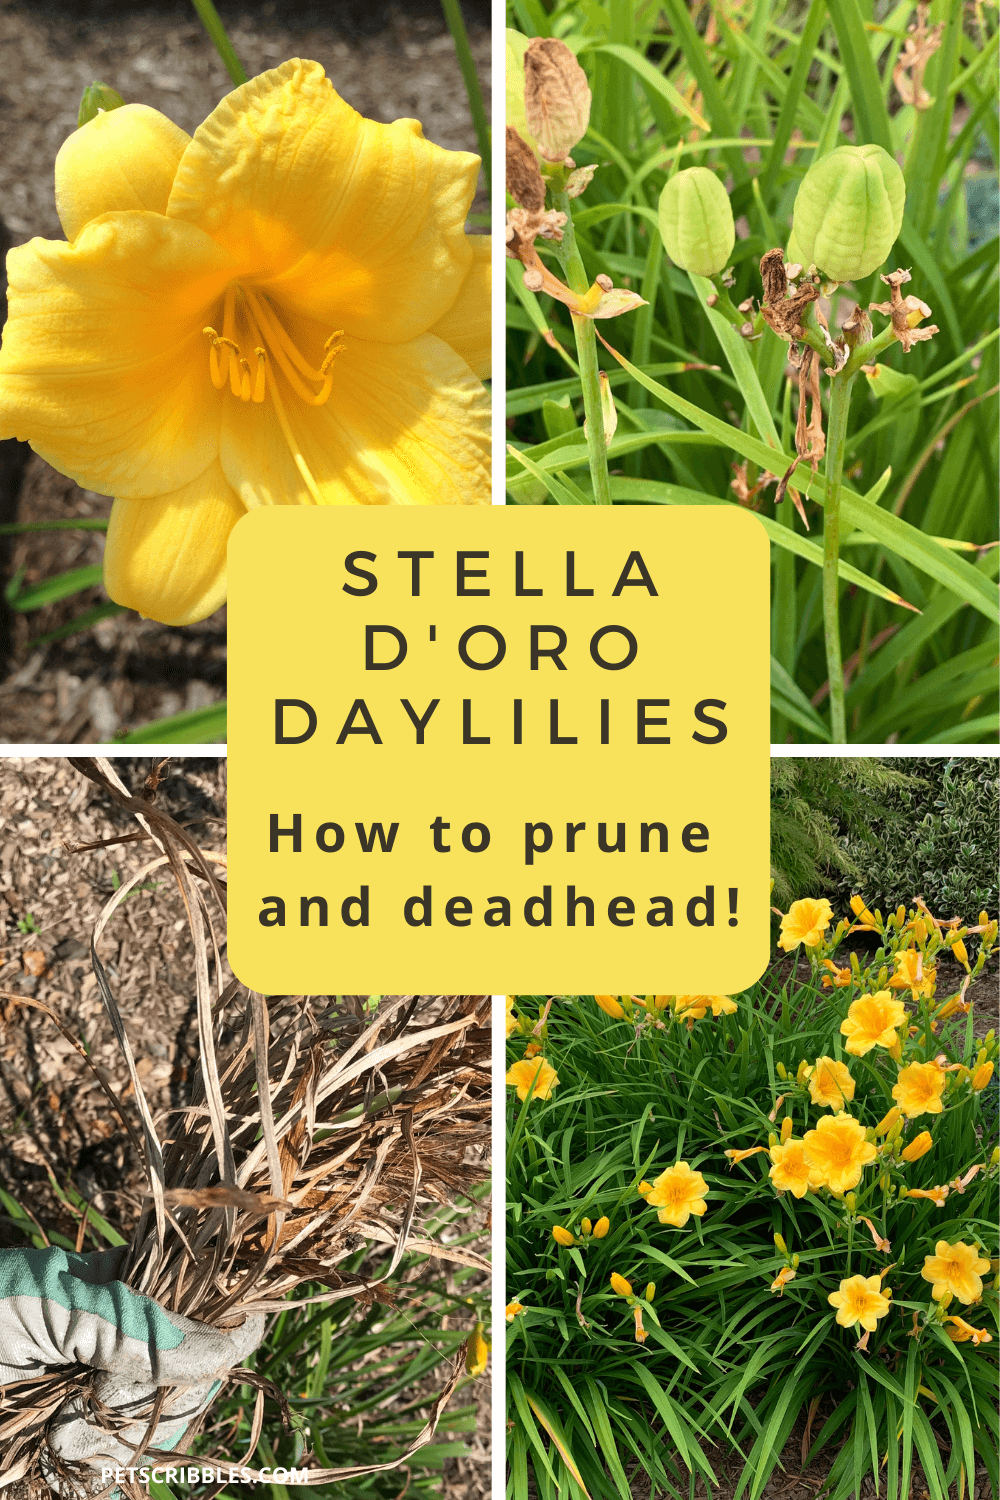 Stella D'Oro Daylilies: how to prune and deadhead (four images showing seedpods, dried stems and blooming flowers)